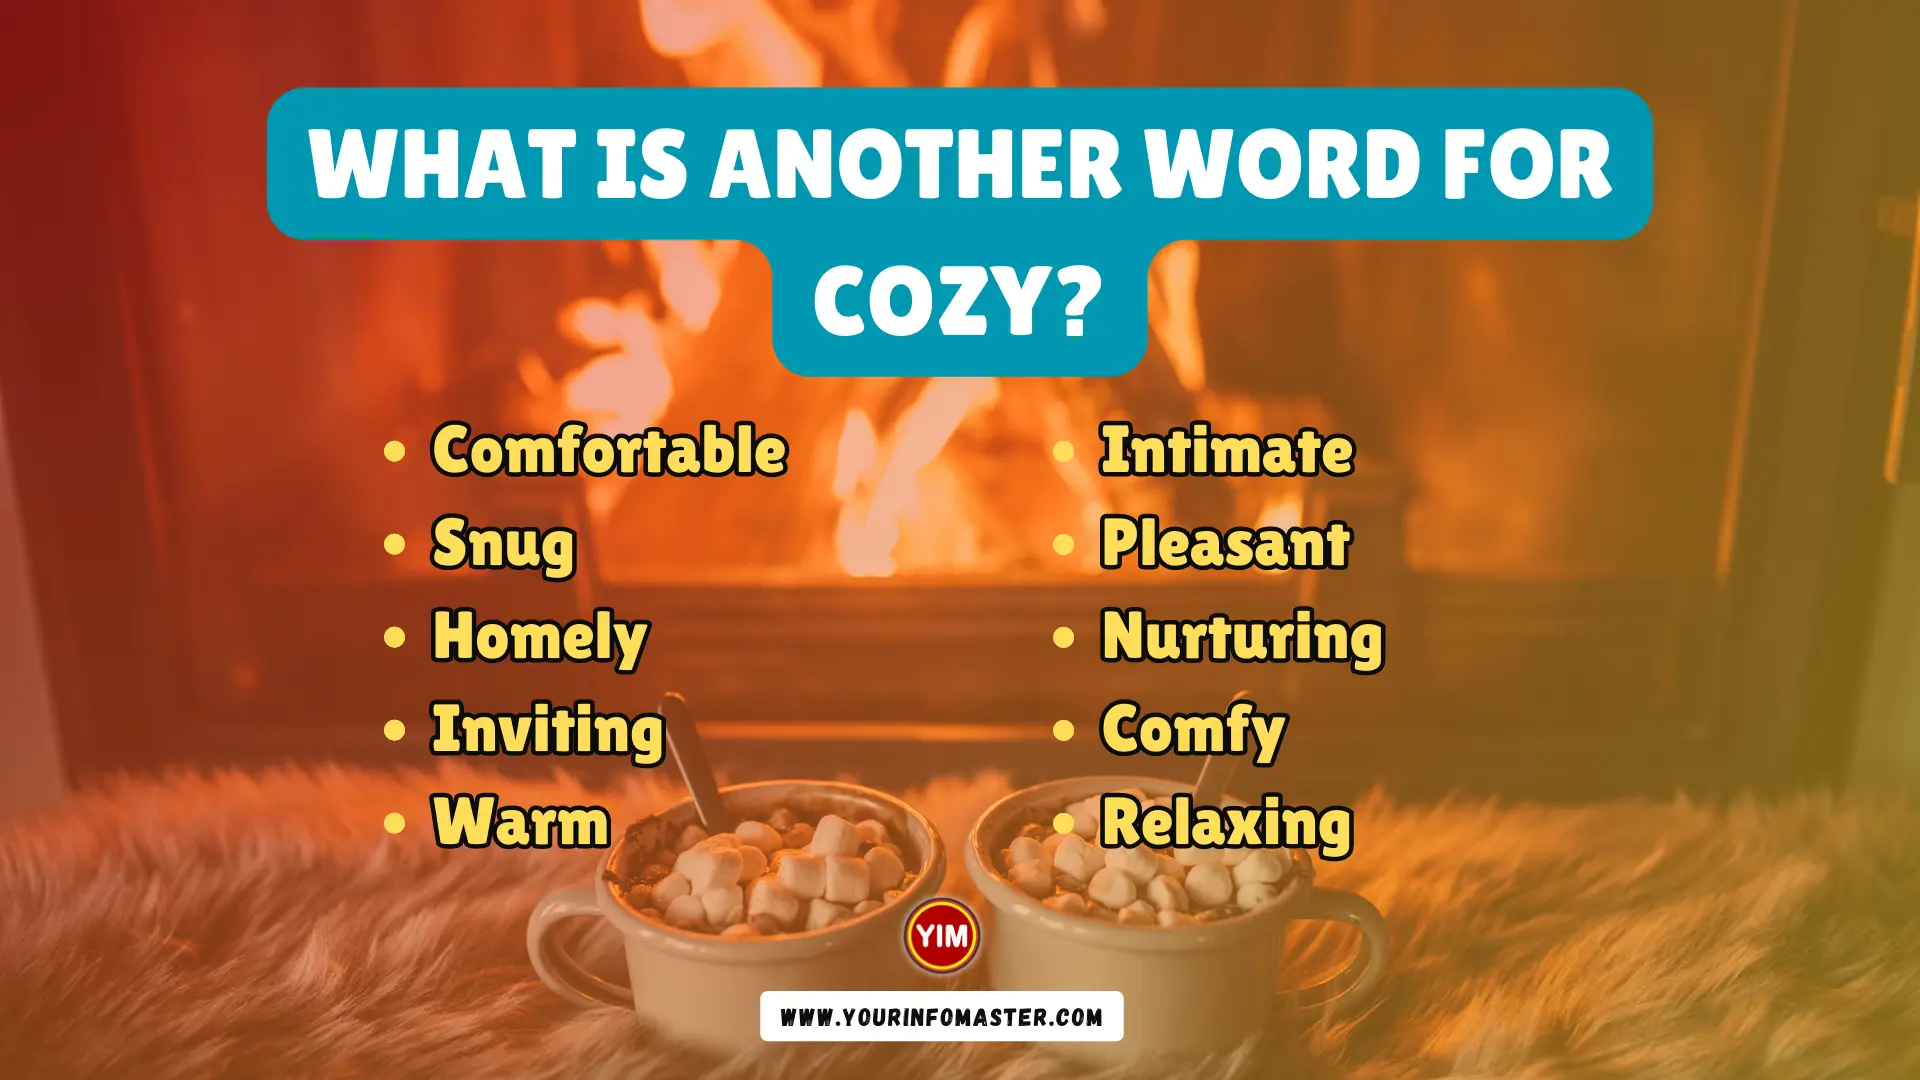 What is another word for Cozy